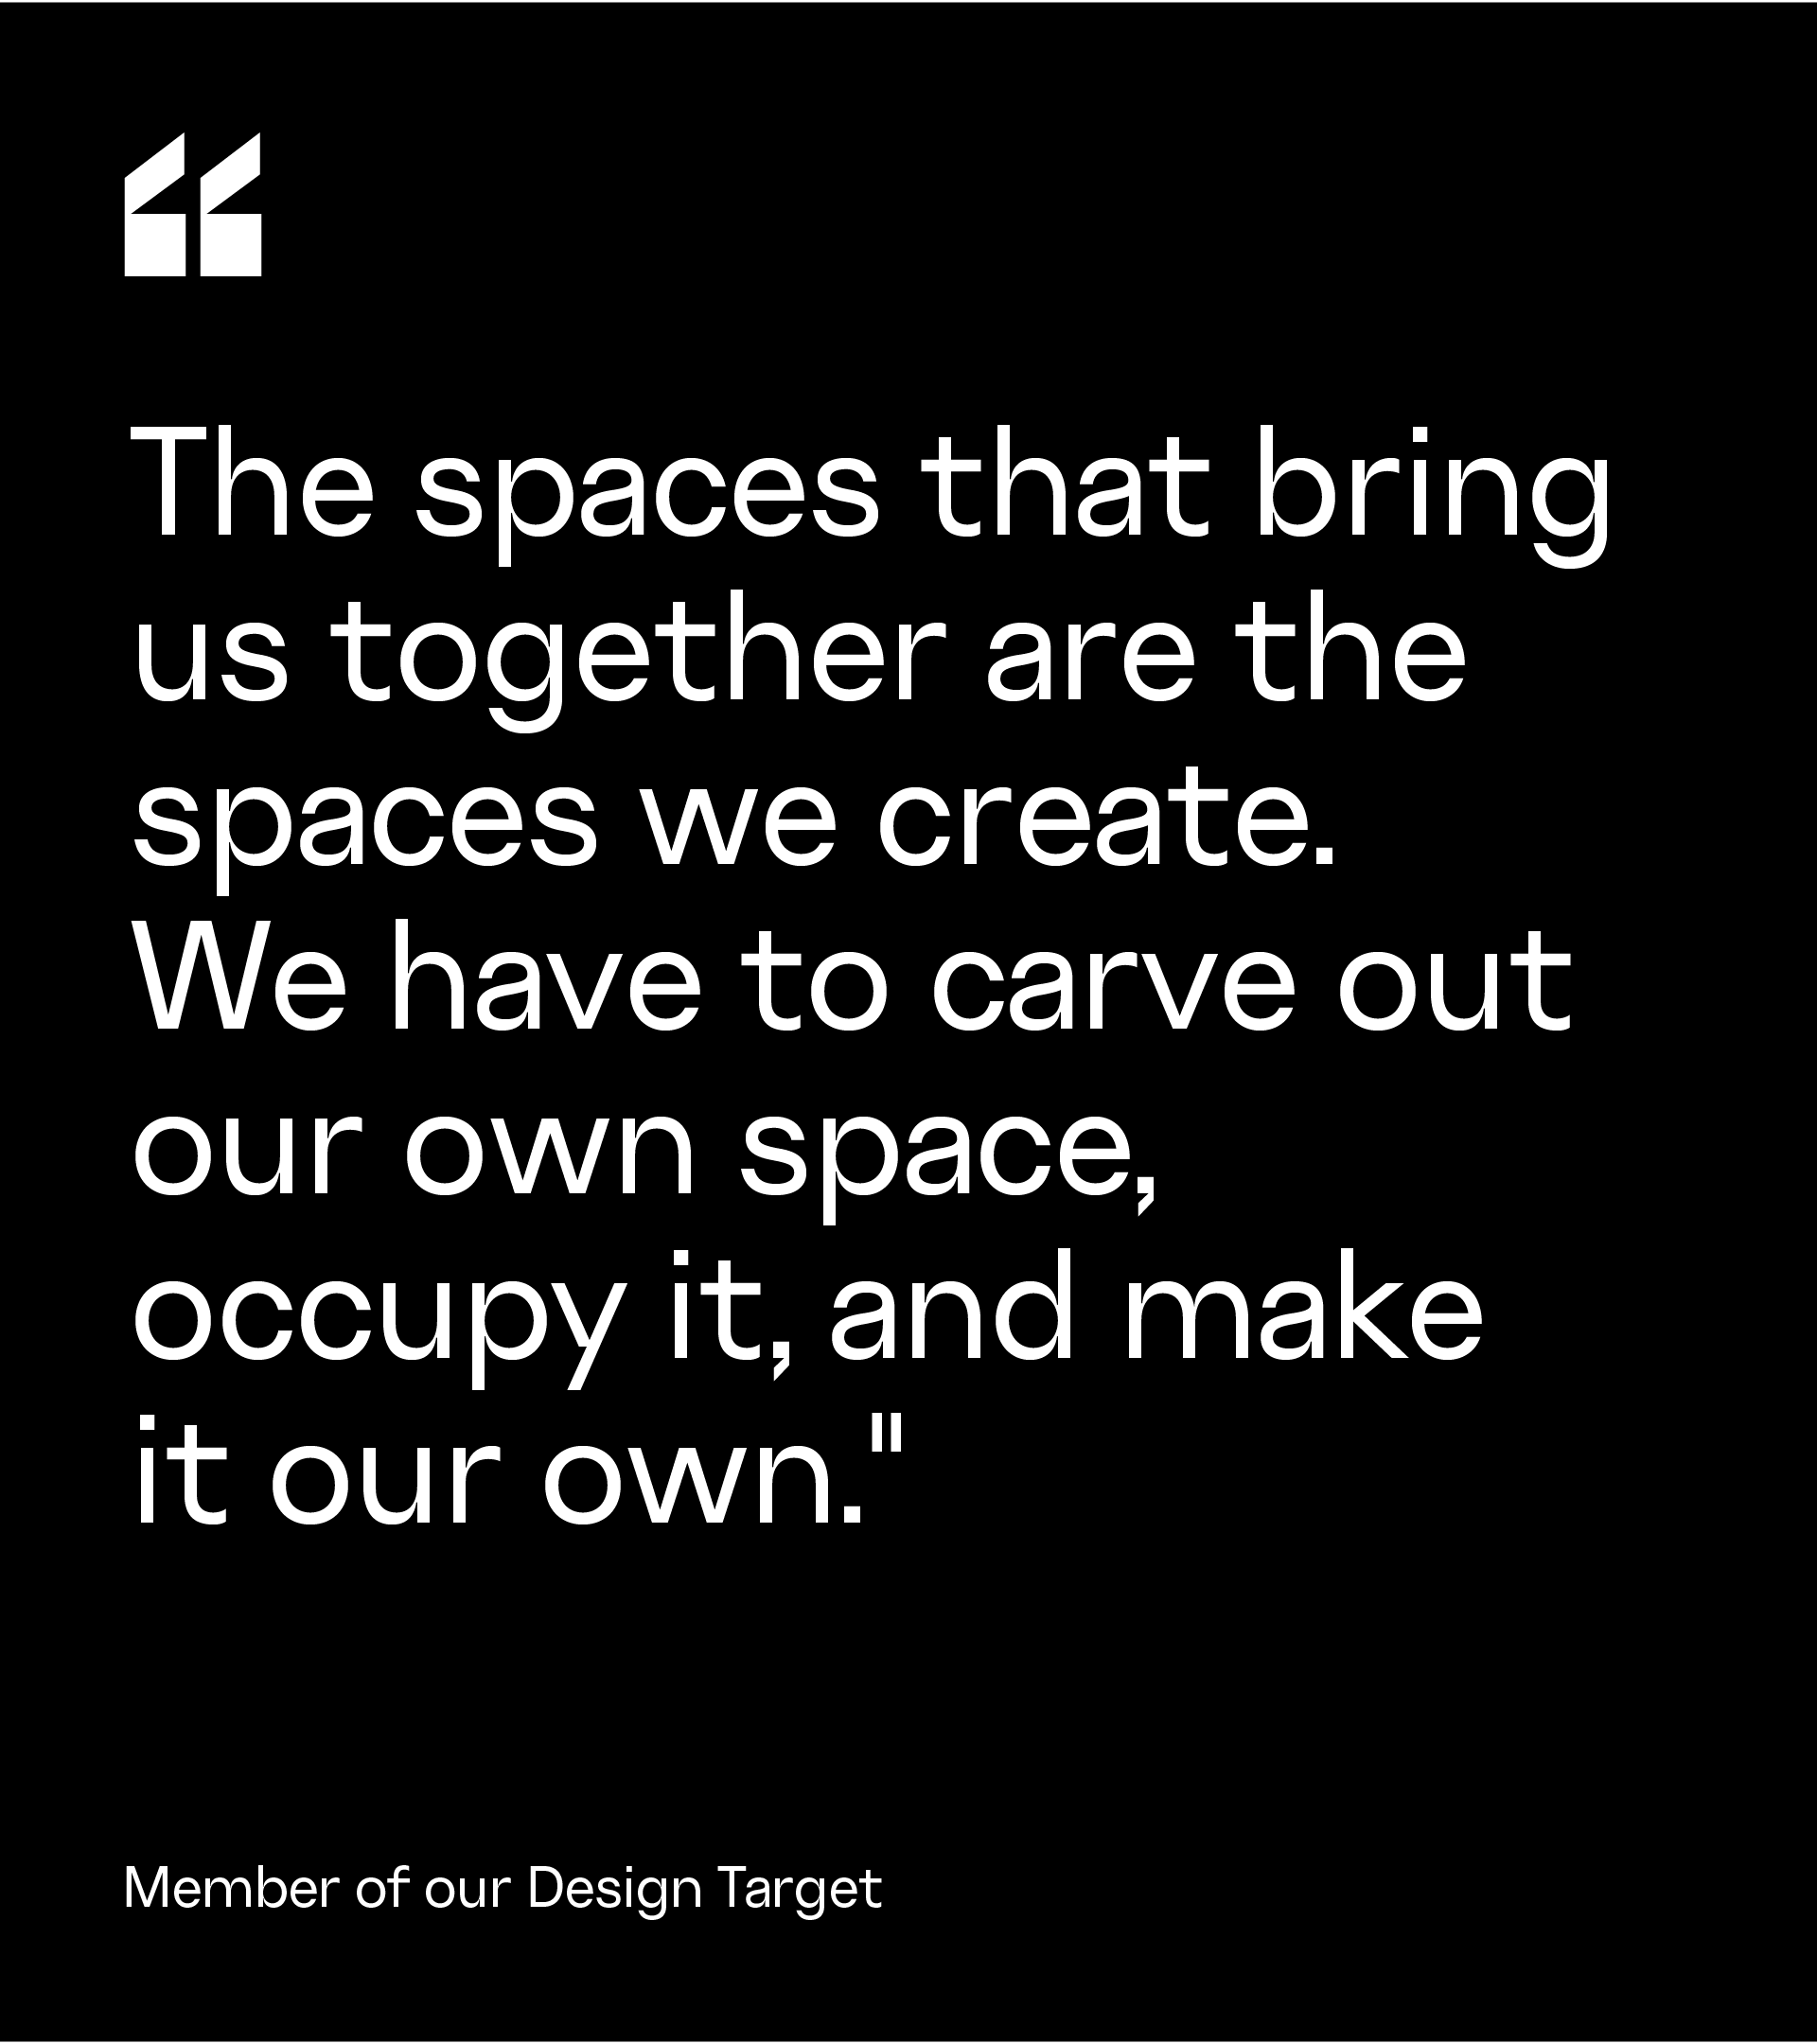 Large quote: “The spaces that bring us together are the spaces we create. We have to carve out our own space, occupy it, and make it our own.”